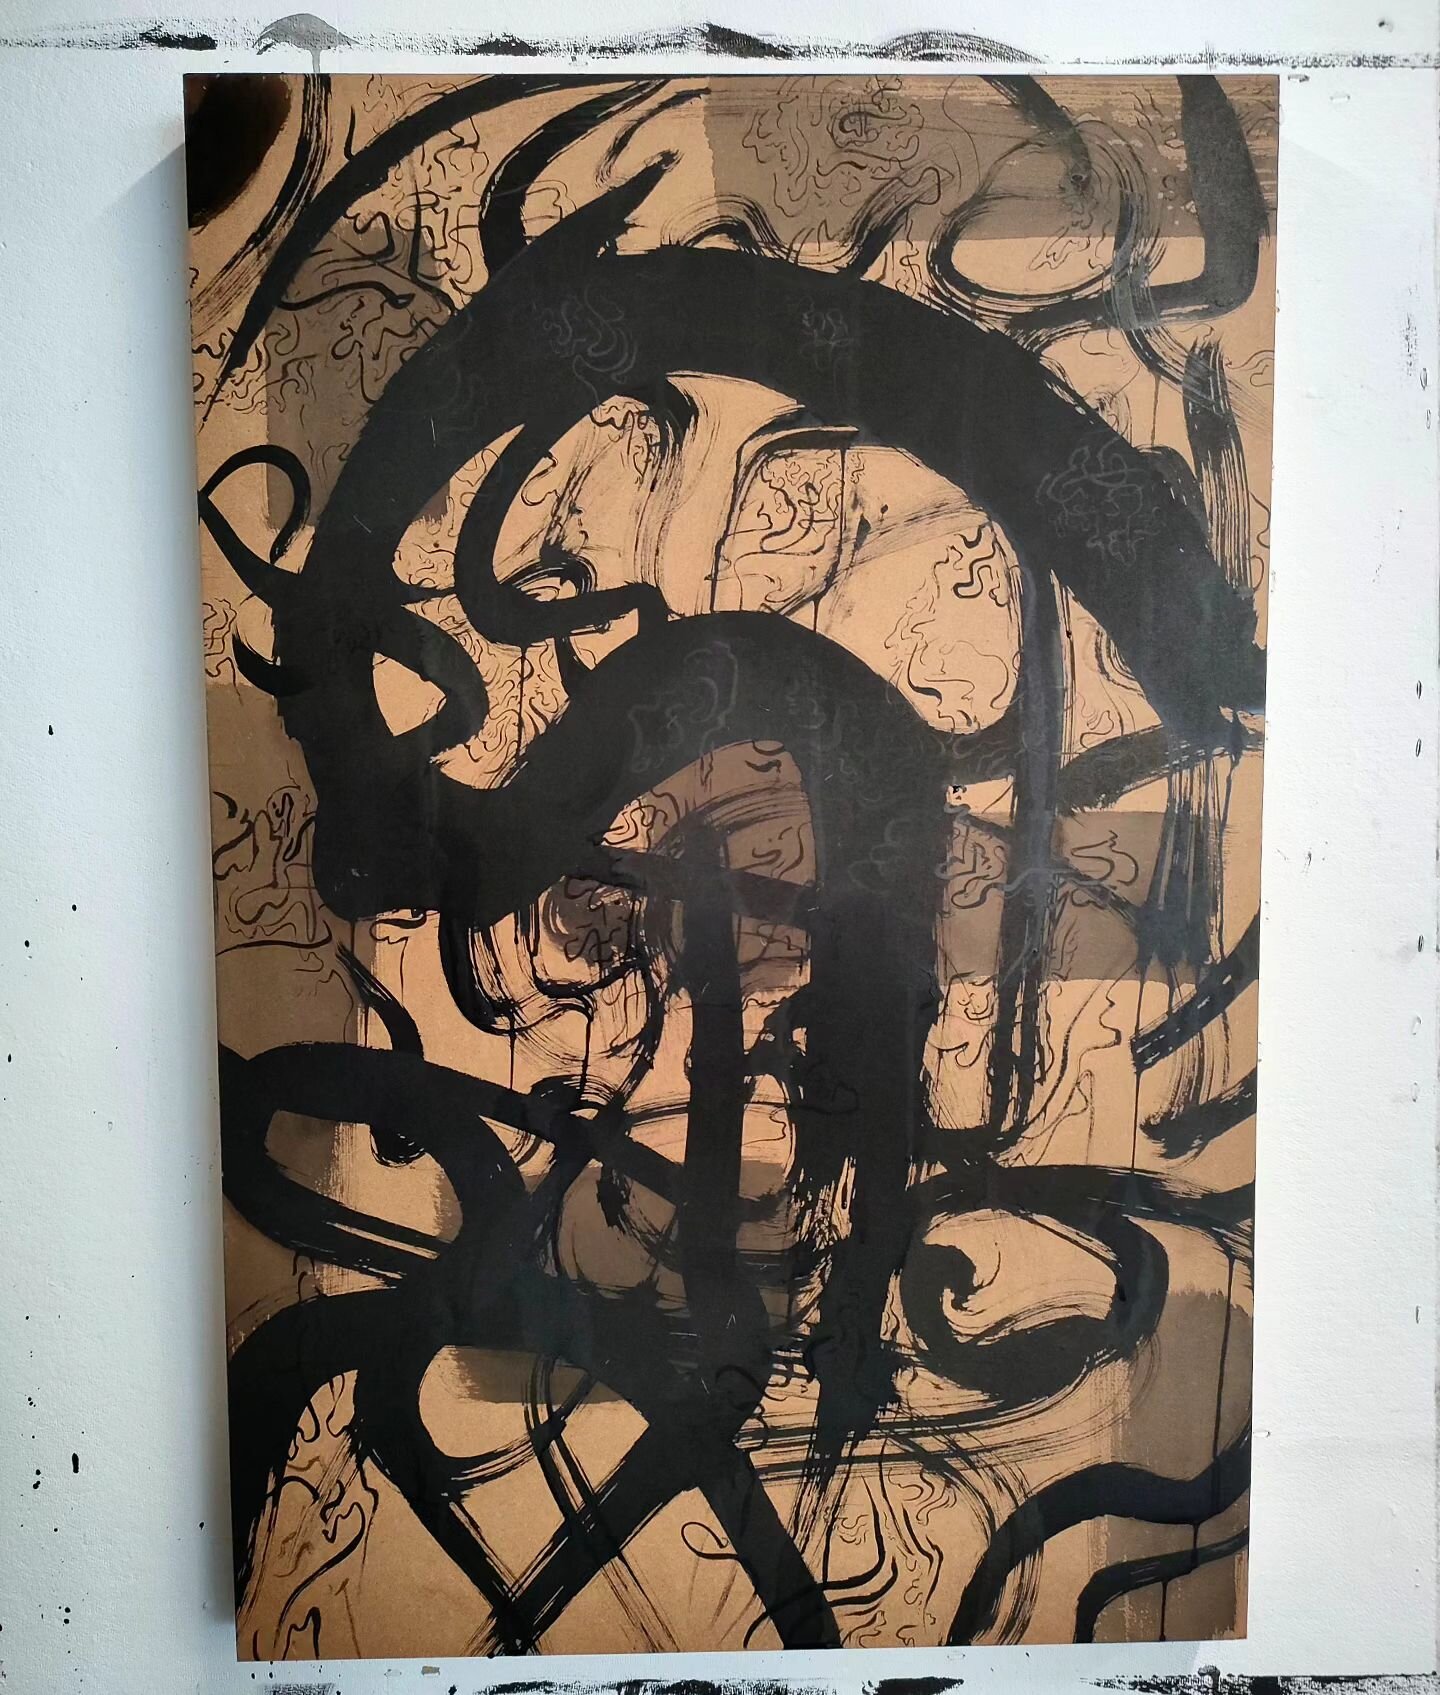 wooden time

Ink on MDF board(?)

#hsupernormal #ink #brush #painting #abstractart #art #artist #painter #calligraphy